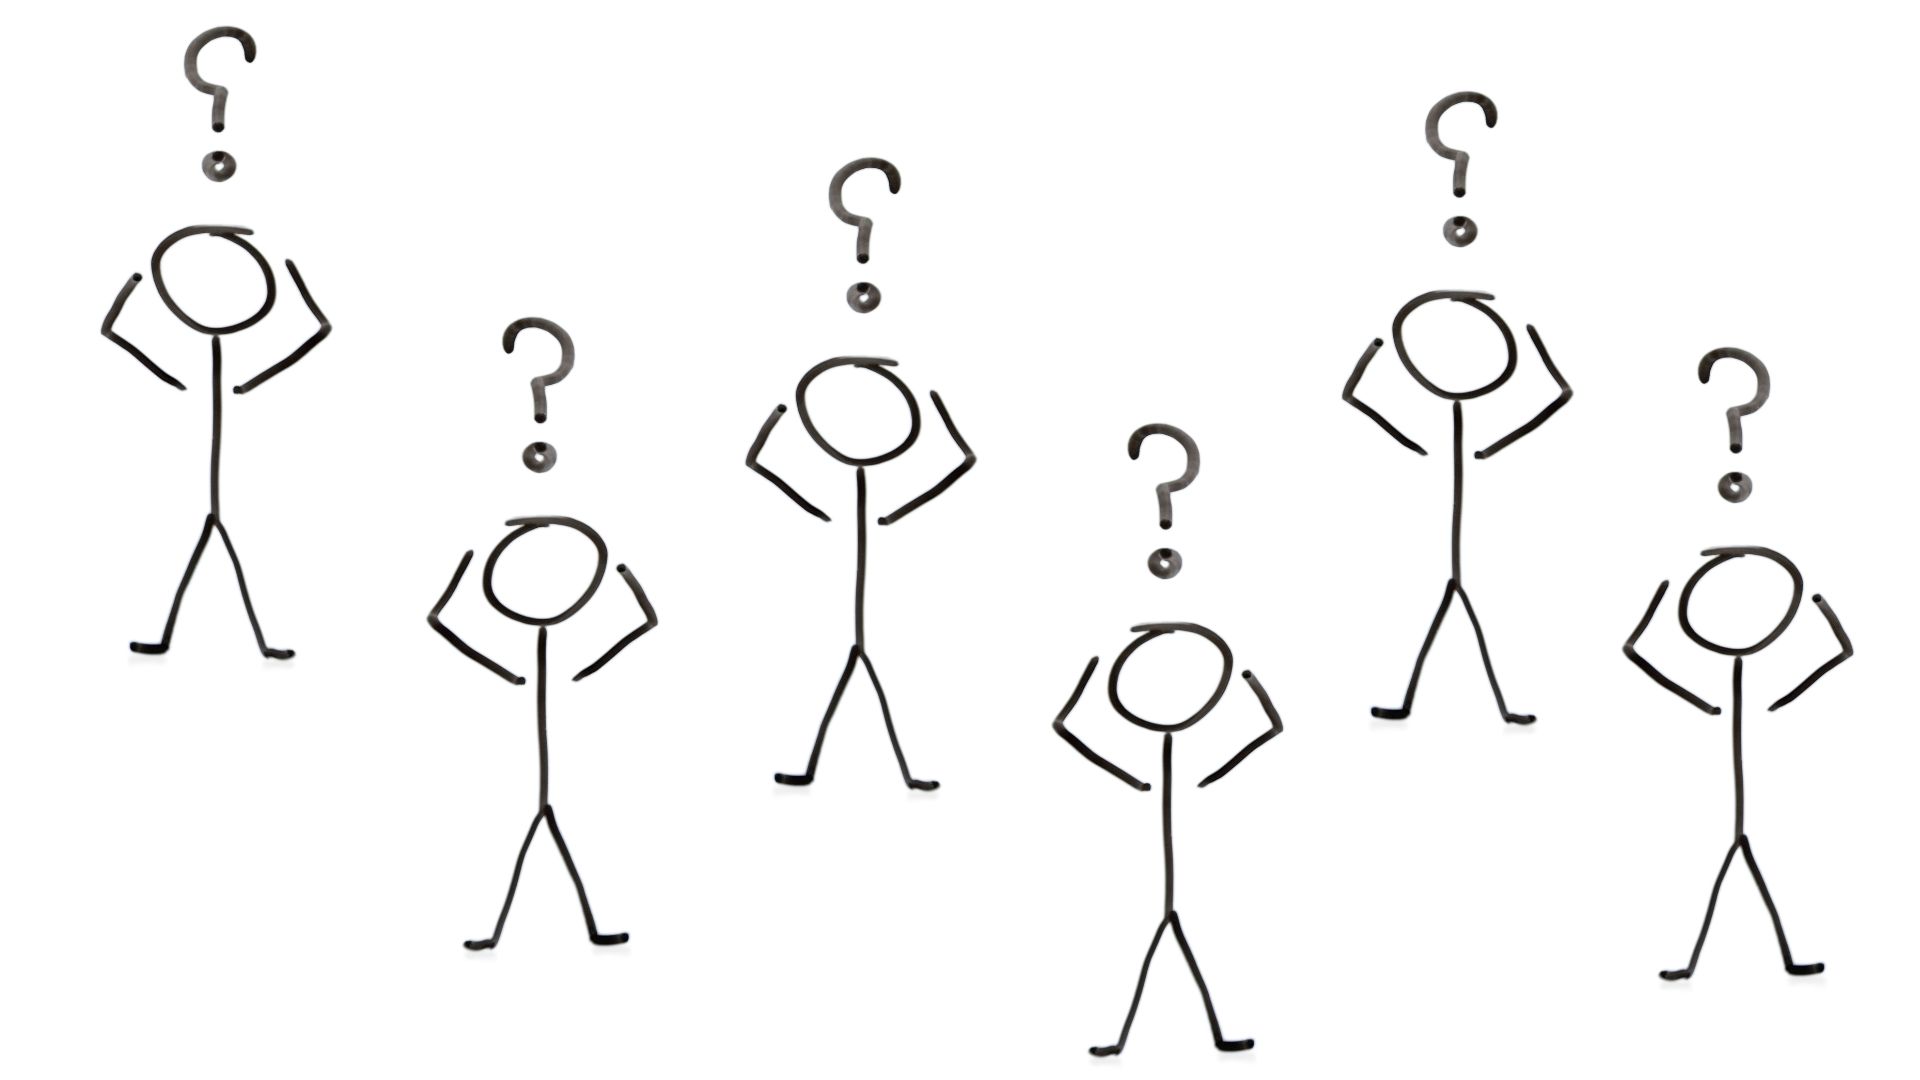 Stickmen with question marks overhead, what does it mean to hold someone accountable